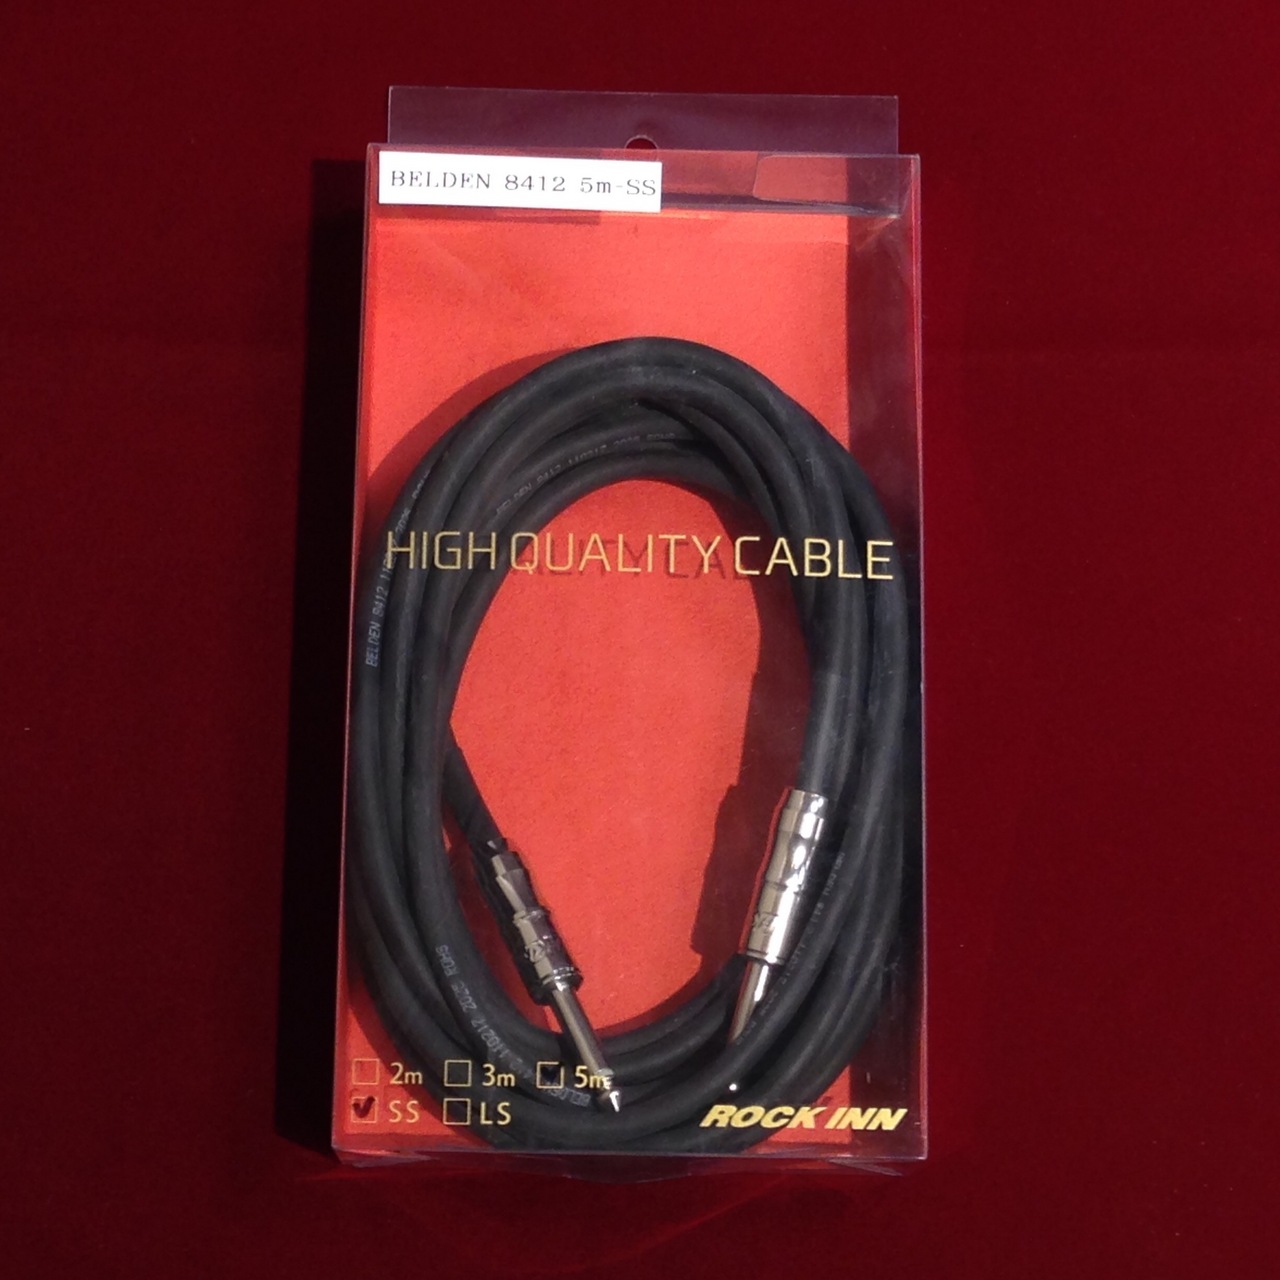 ROCK INN HIGH QUALITY CABLE 5m(S/S) 